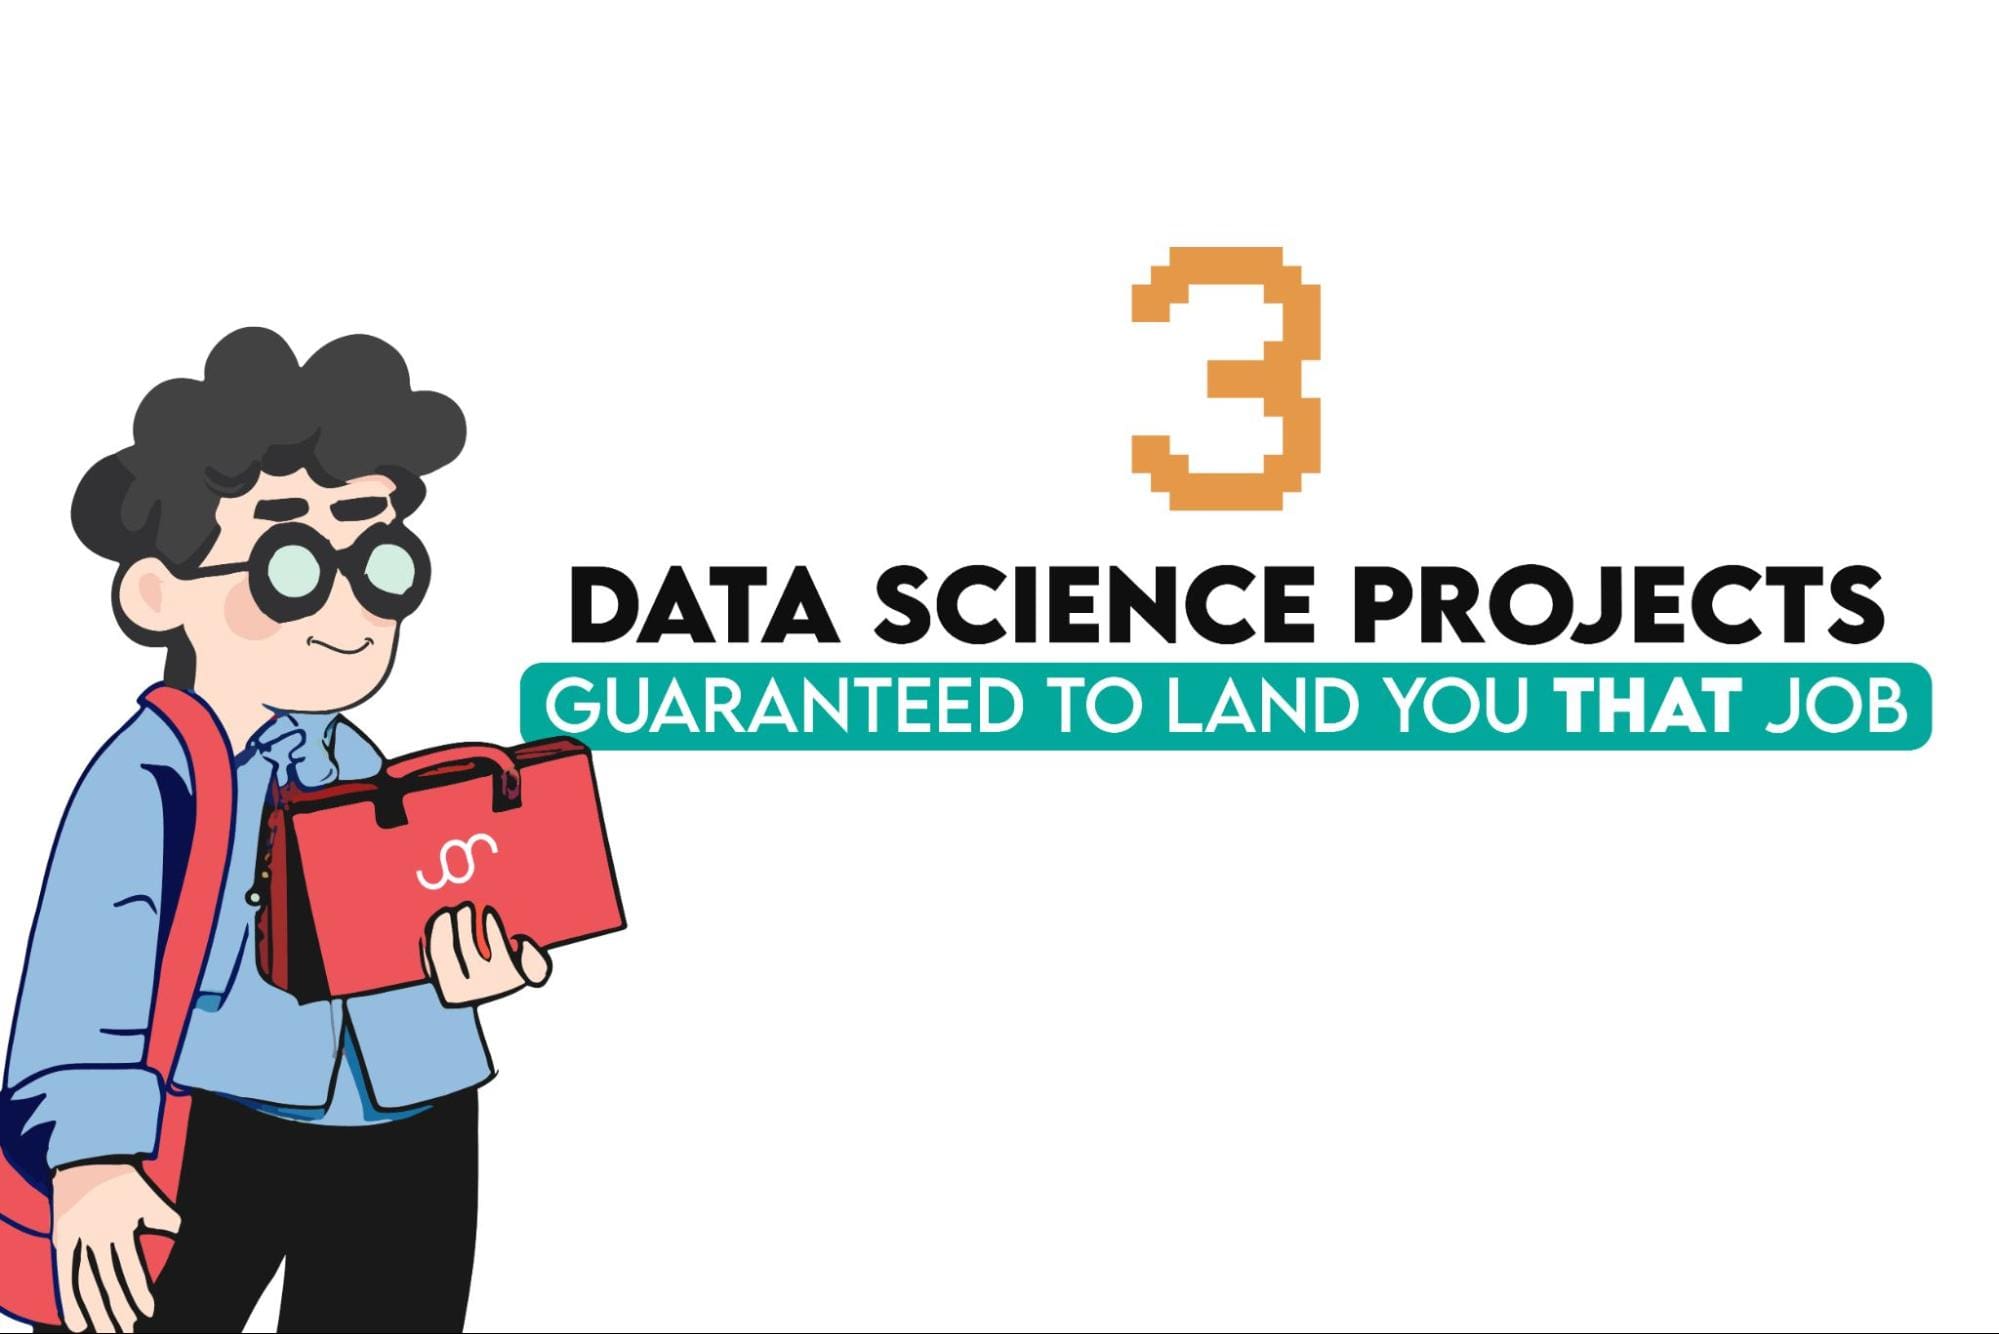 3 Data Science Projects Guaranteed to Get You That Job